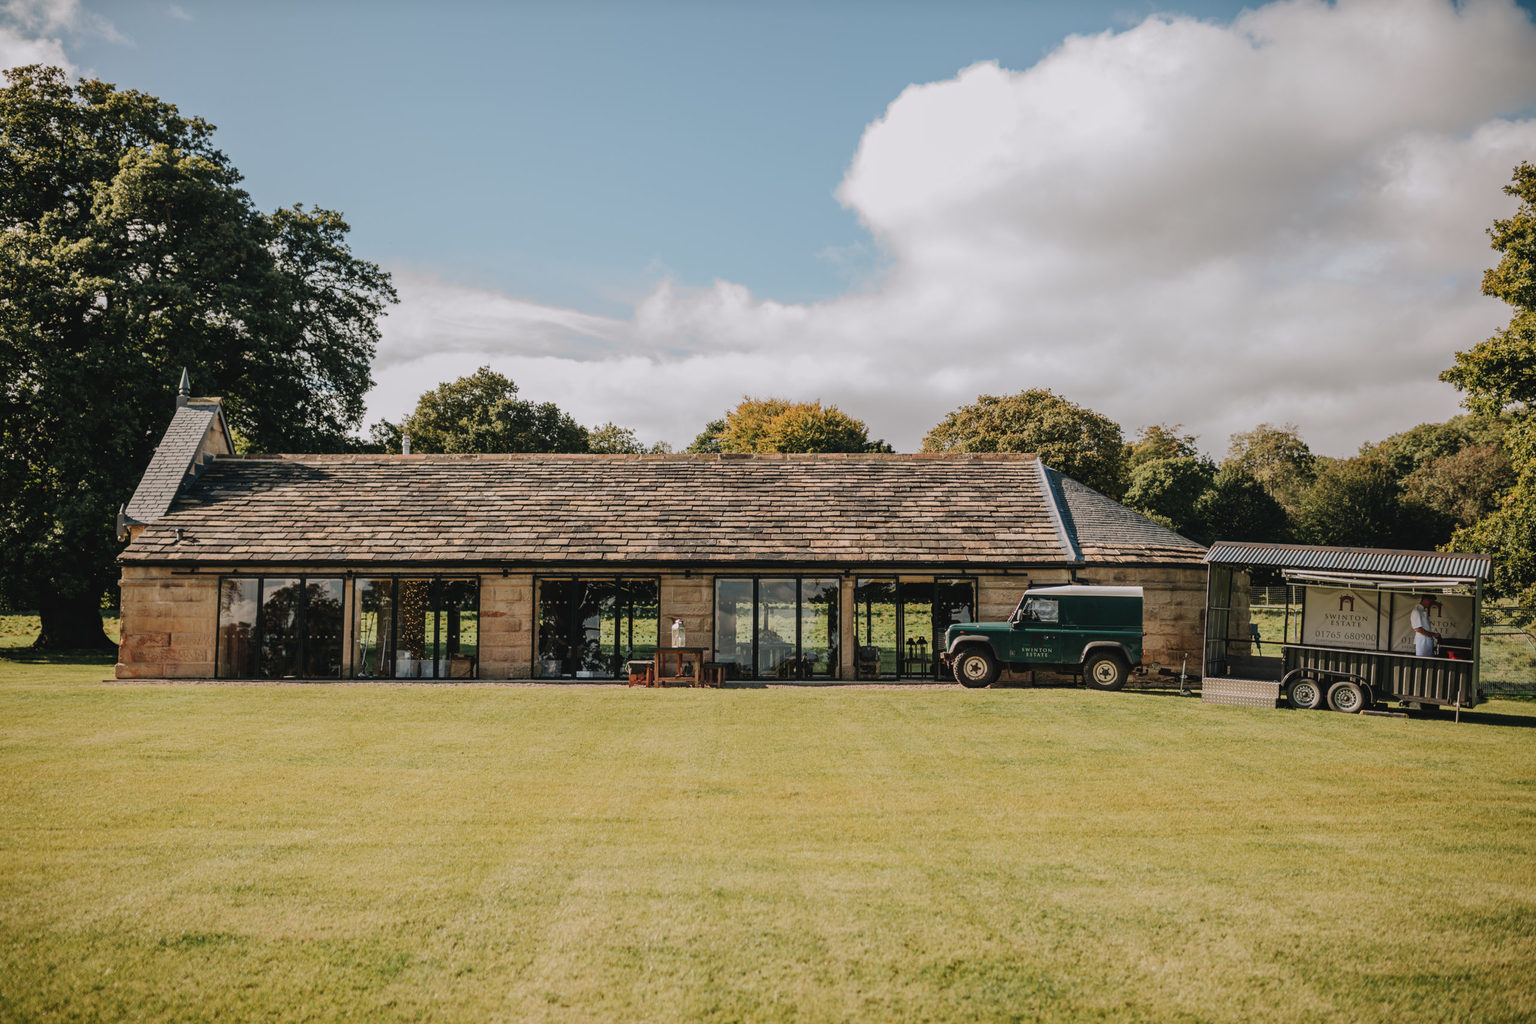 The Deer House party and celebration venue at the Swinton Estate in North Yorkshire